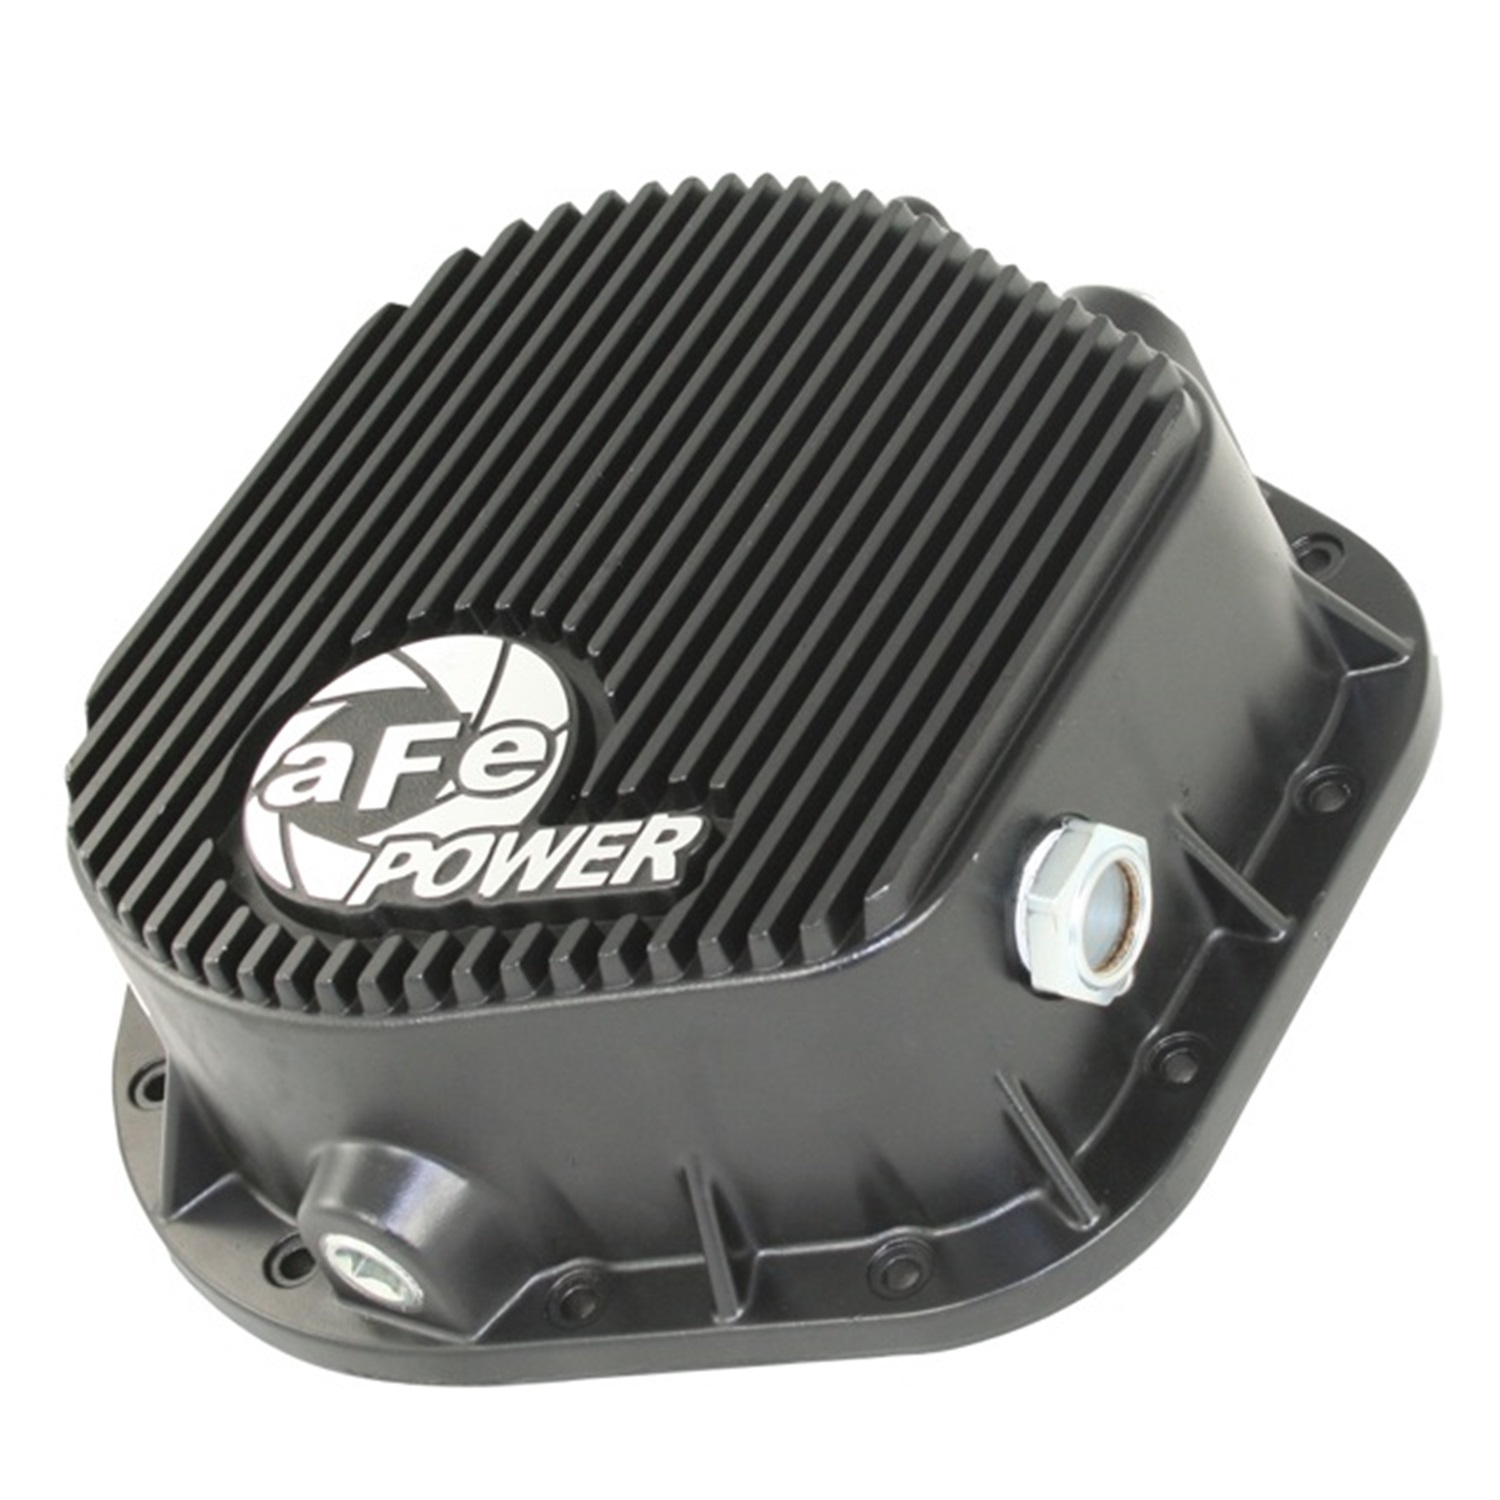 aFe Power aFe Power 46-70021 Differential Cover